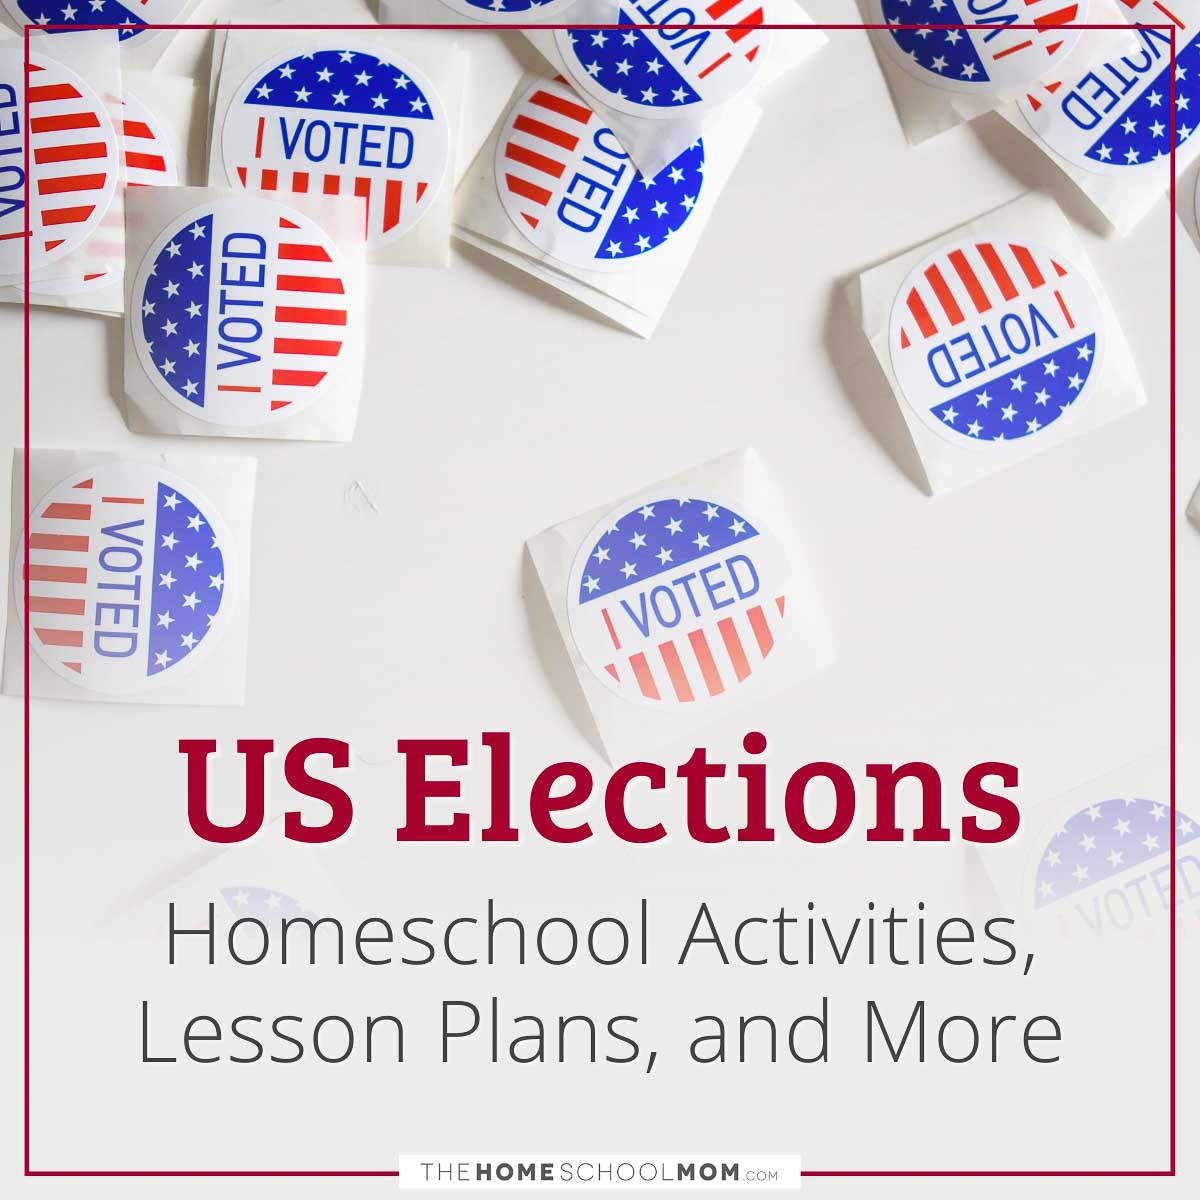 US Elections Homeschool Activities, Lesson Plans, and More.